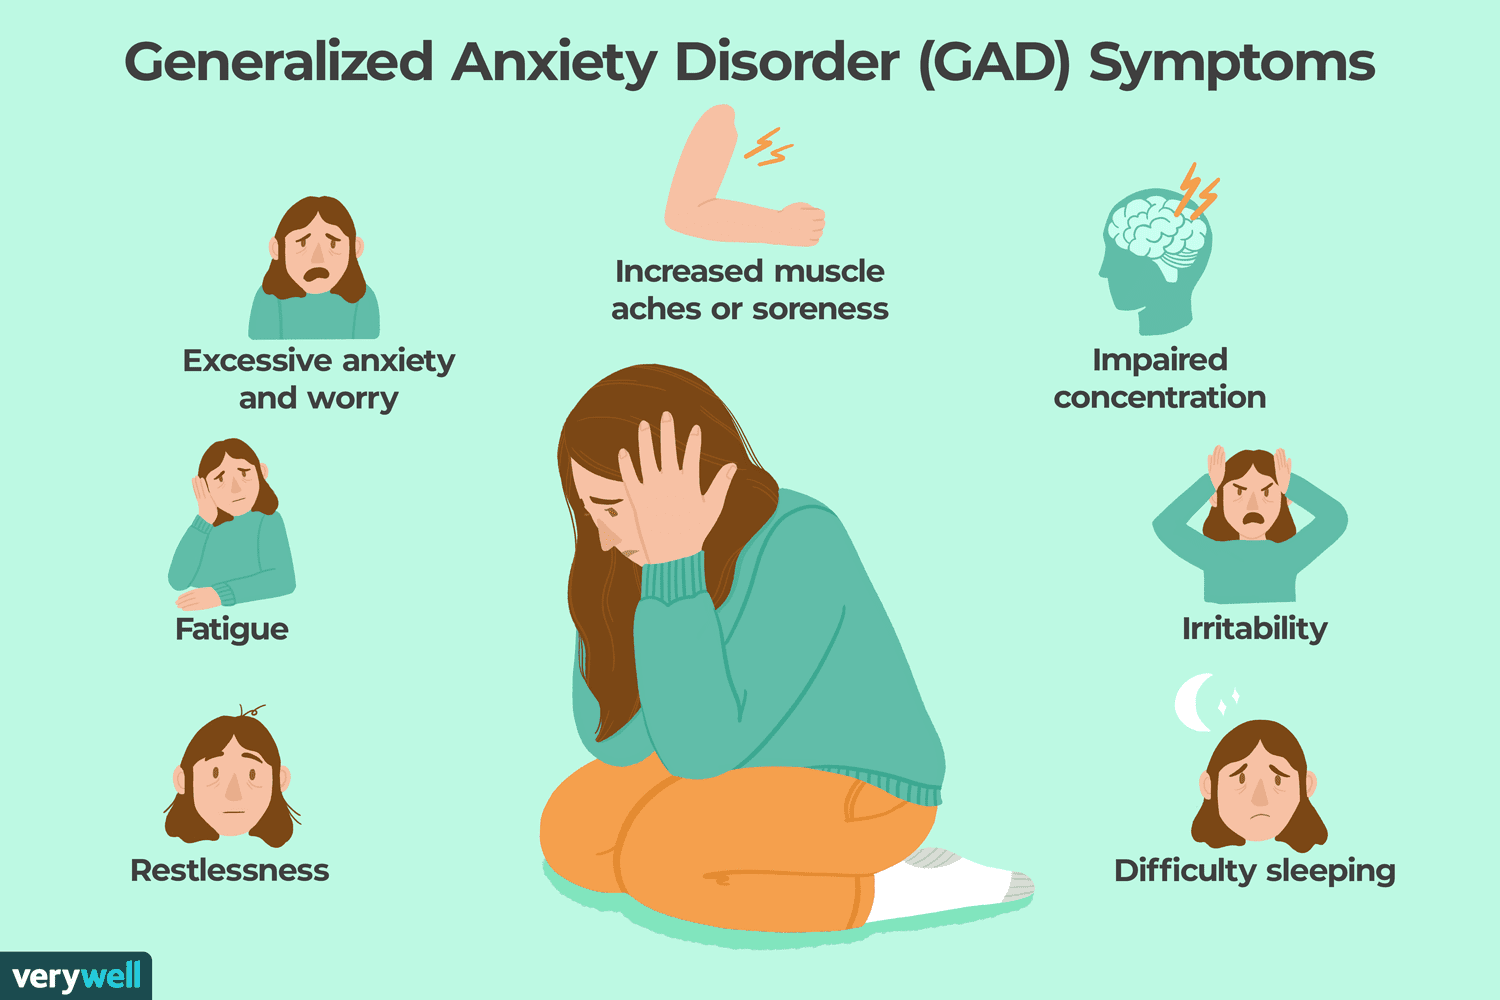 dsm-5-criteria-for-generalized-anxiety-disorder-1393147-final-5cde49b87f644d4a9eb25ad7ab1ceae0.png